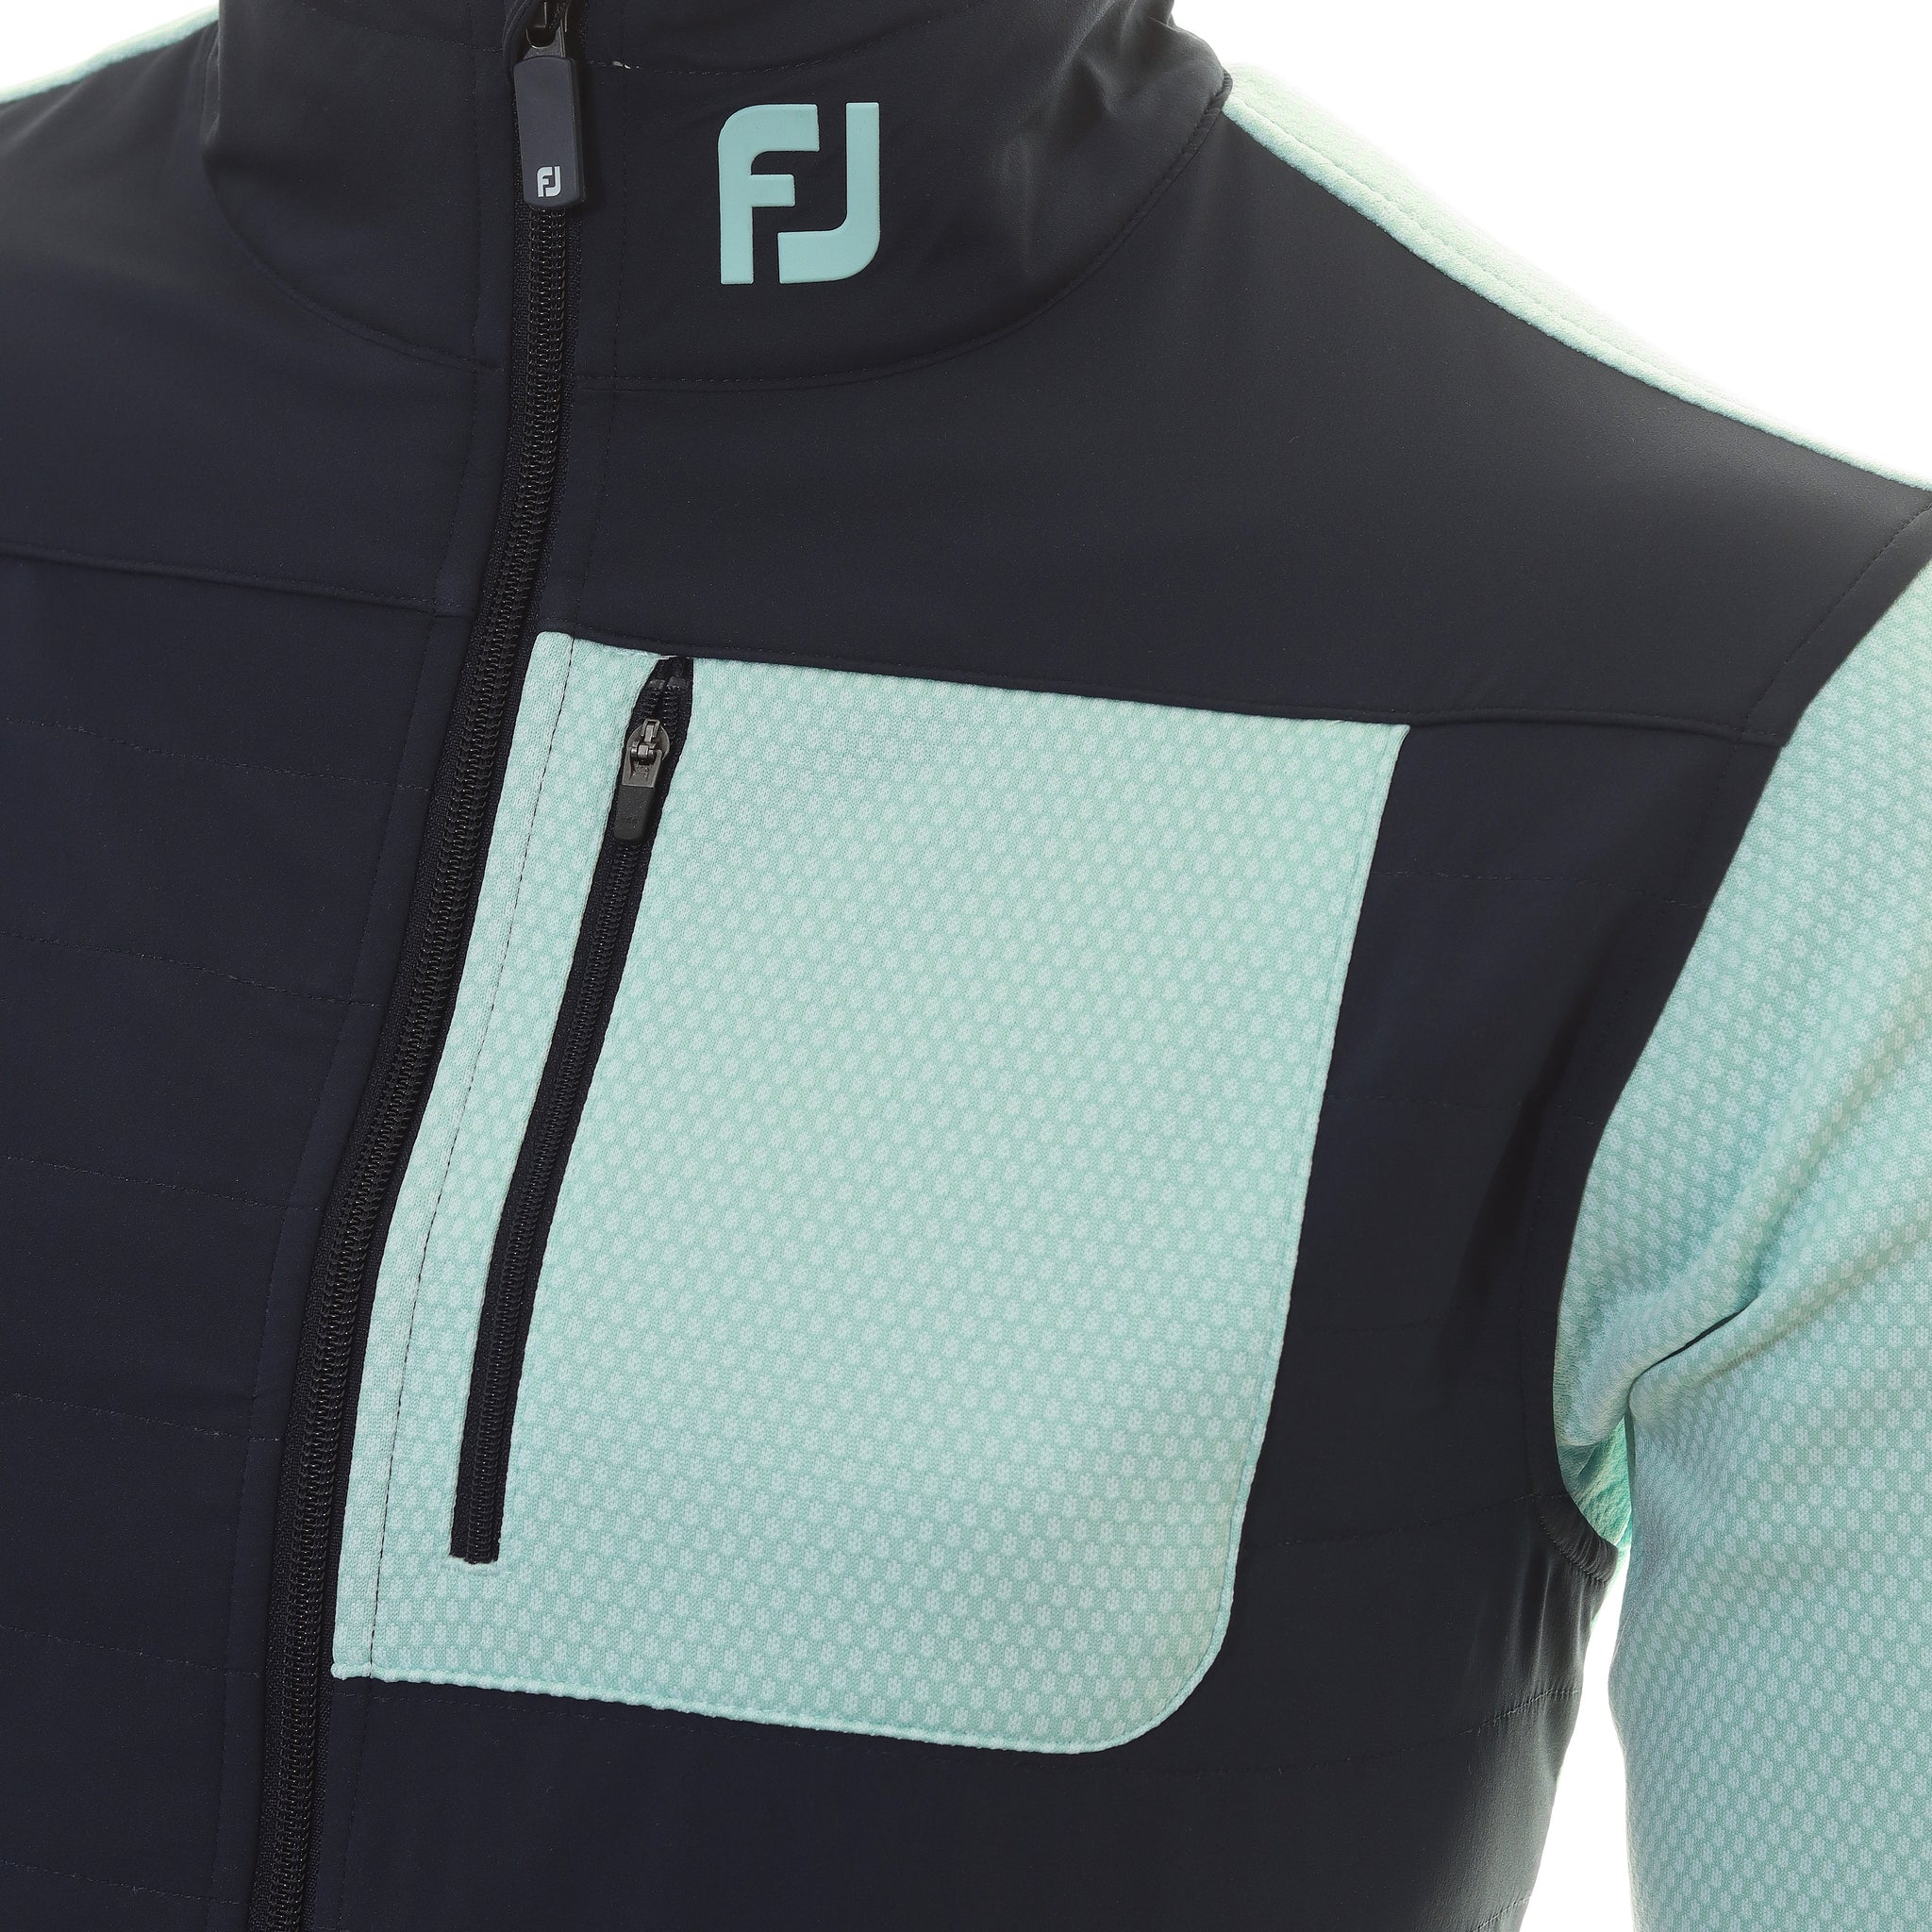 FootJoy ThermoSeries Hybrid Jacket 89931 Seaglass Navy | Function18